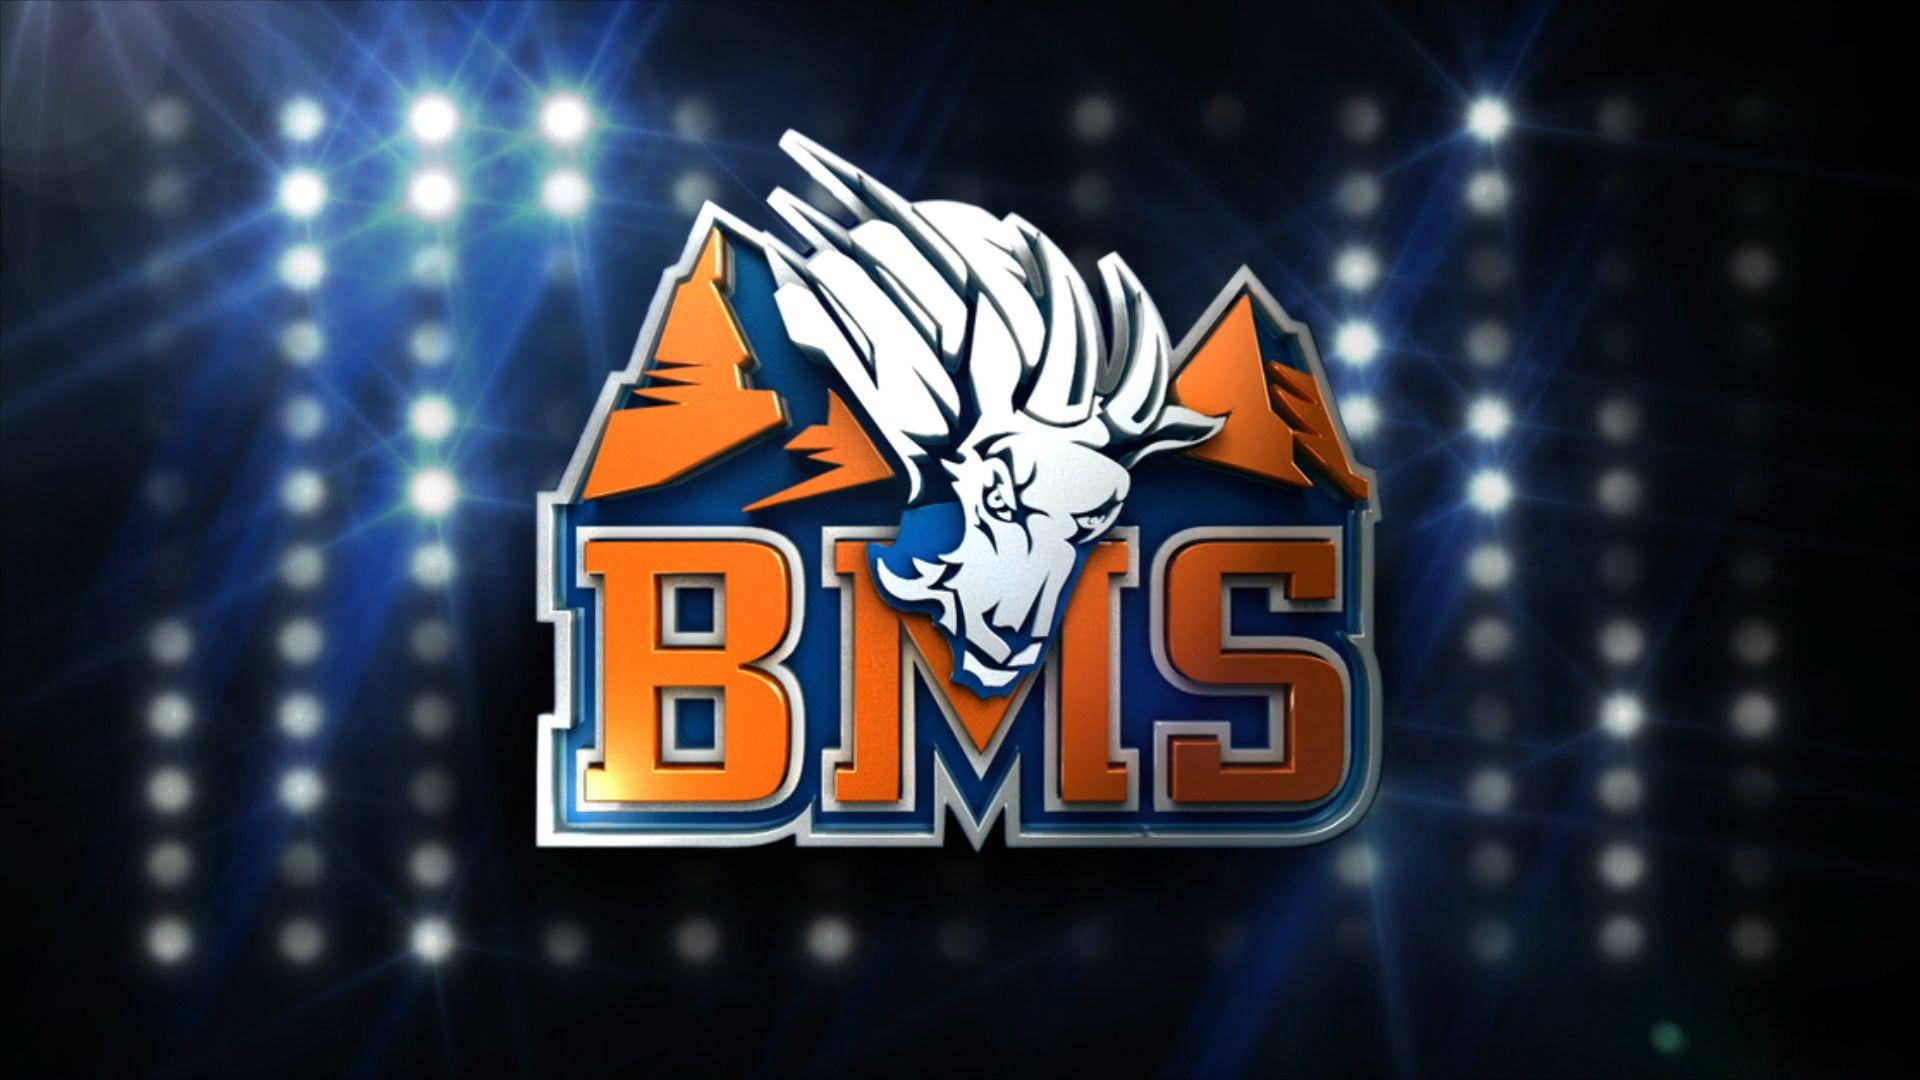 Blue Mountain State Catchy Logo Wallpaper